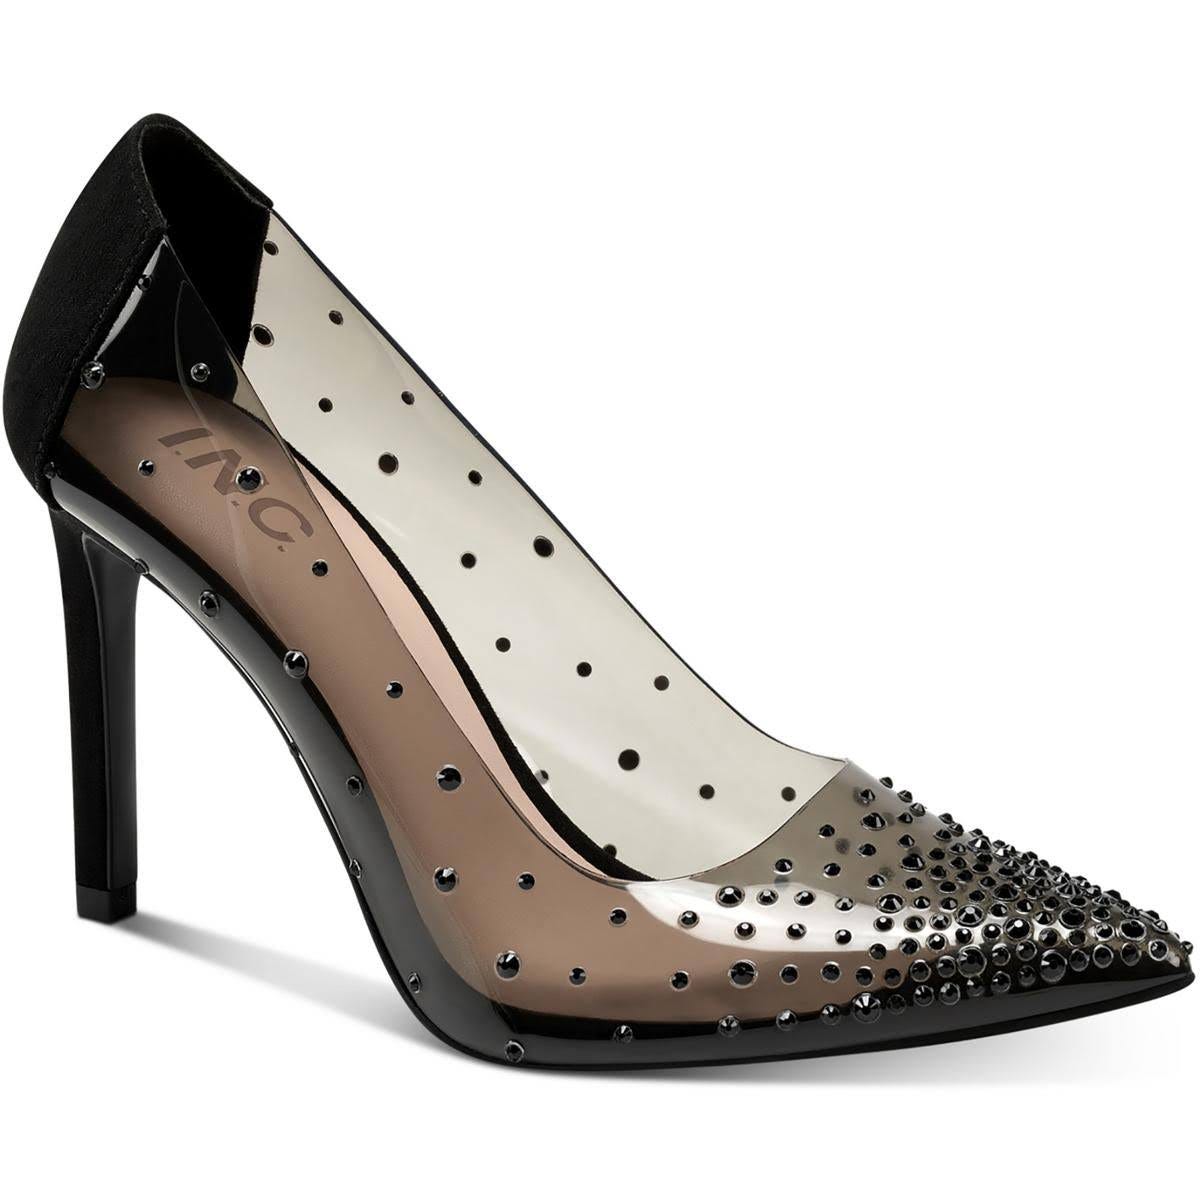 Sparkly Black Pump with Insole Padding | Image